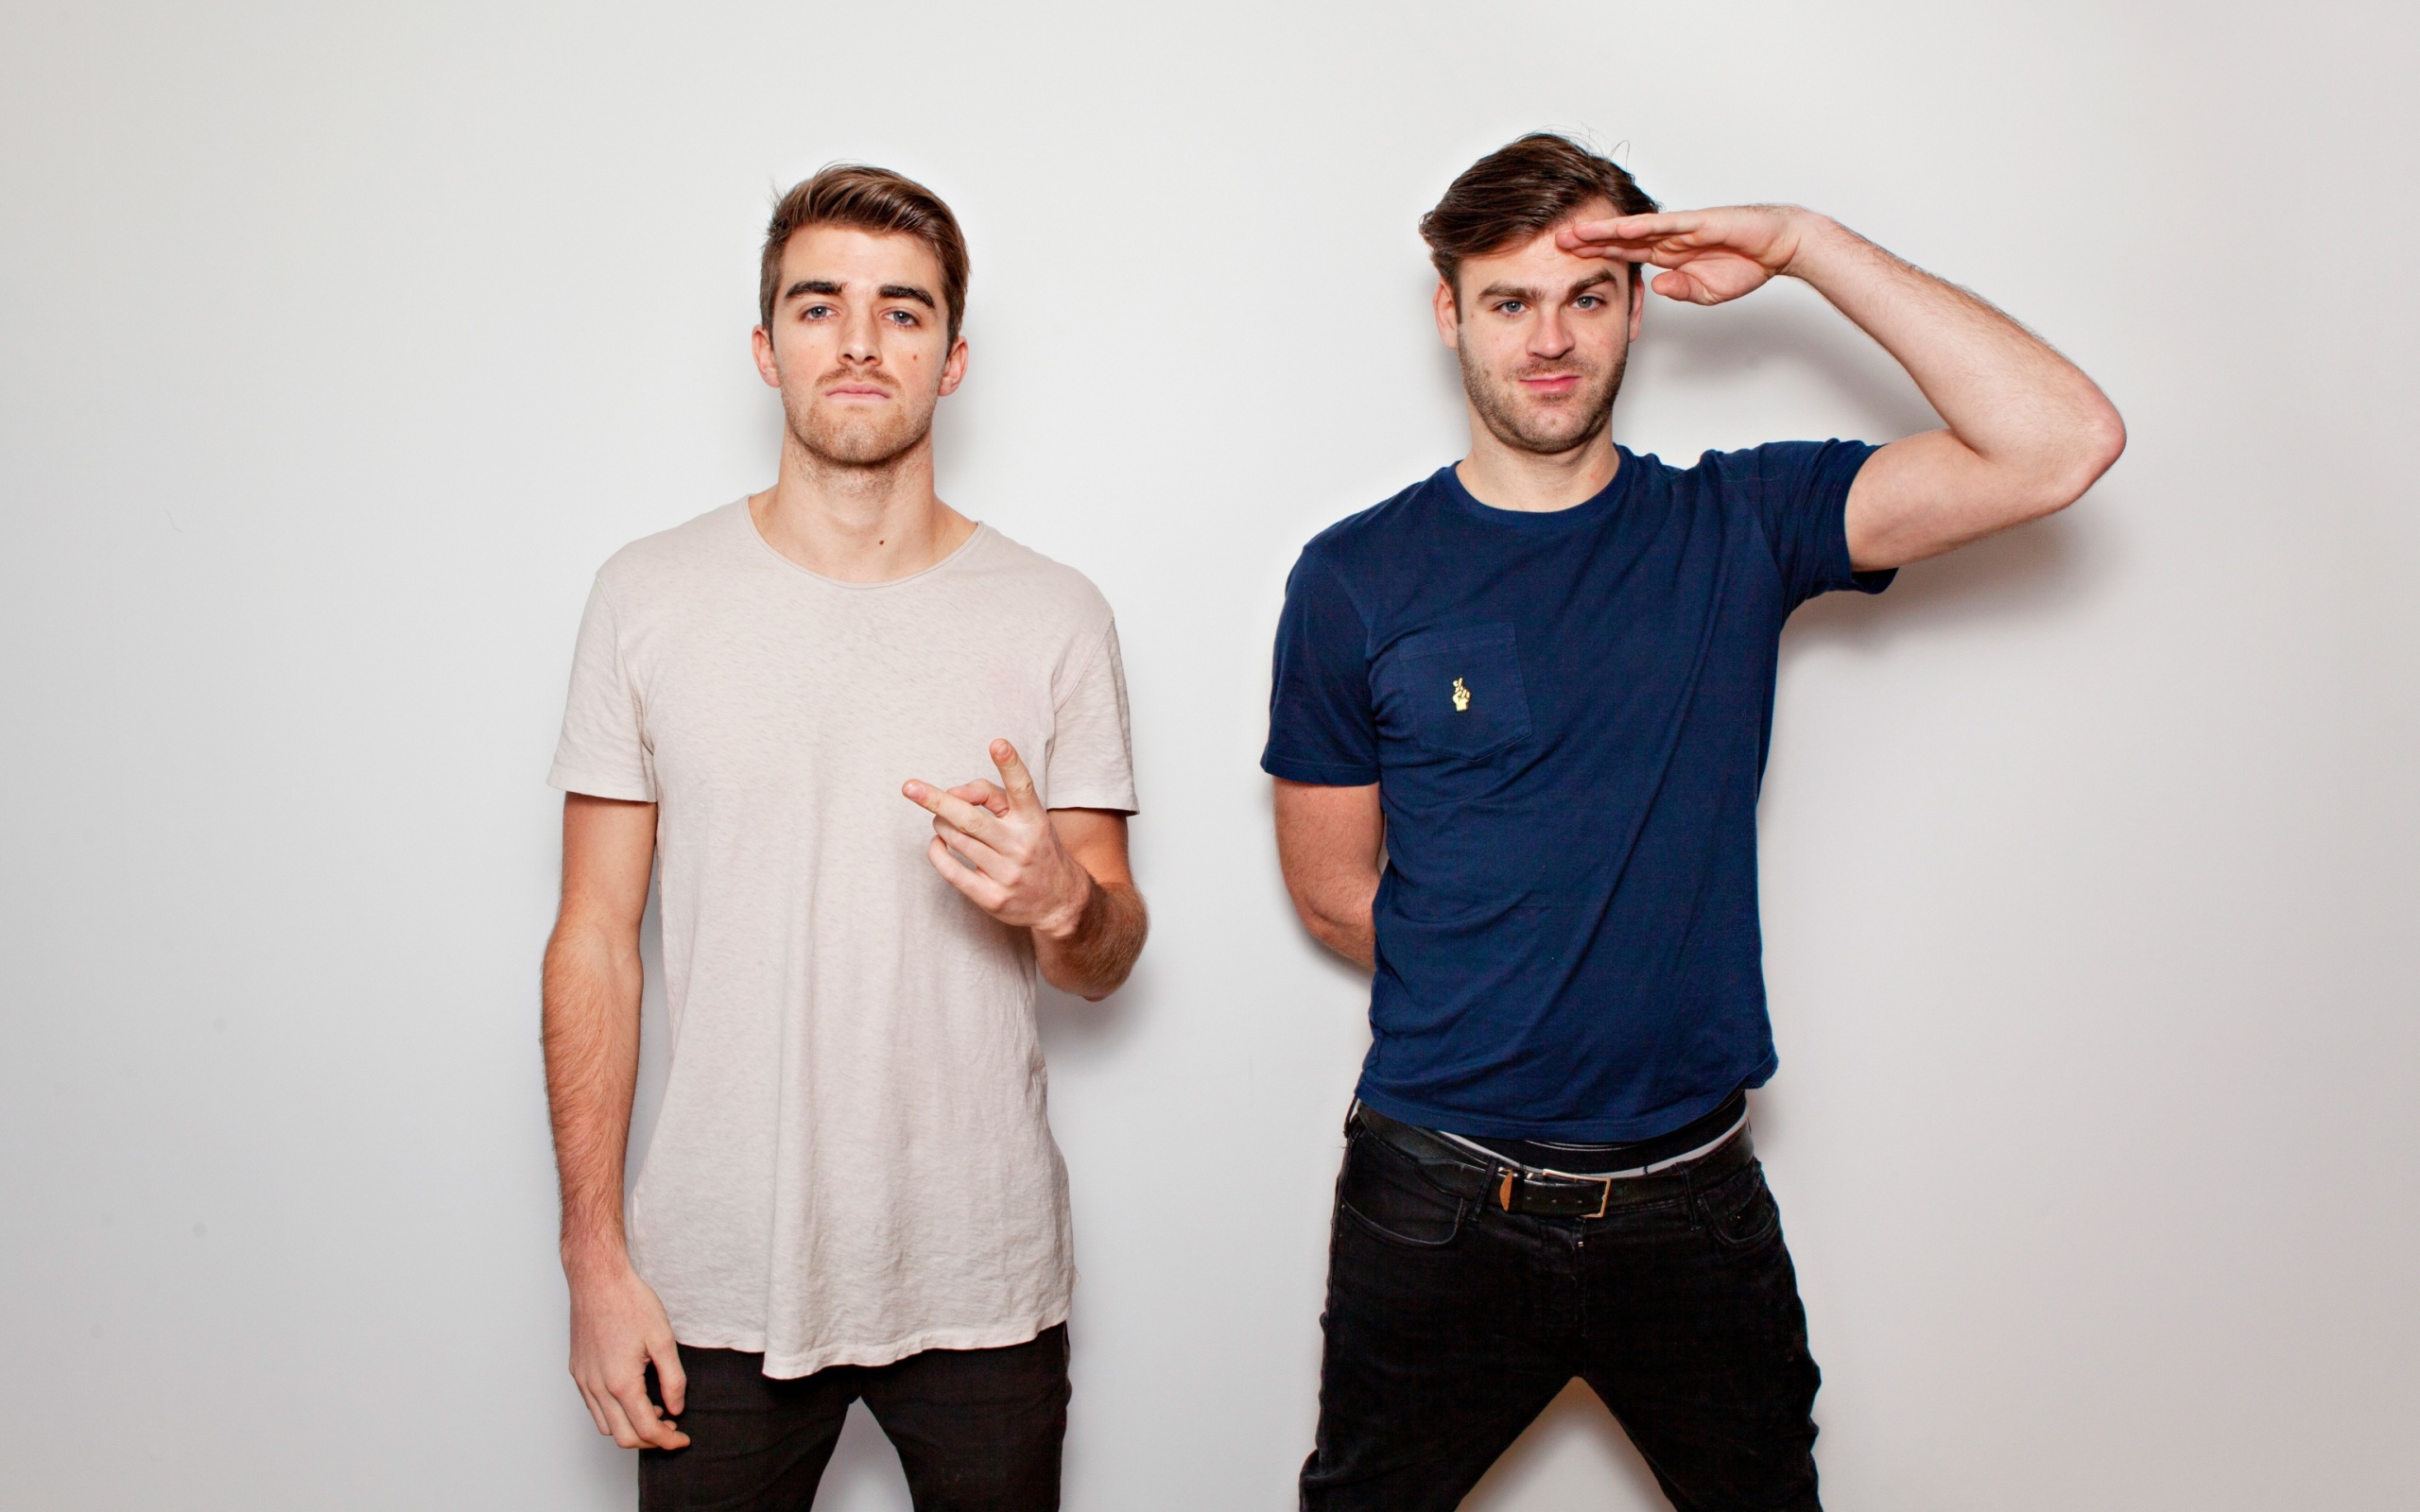 Das The Chainsmokers with Andrew Taggart and Alex Pall Wallpaper 2560x1600